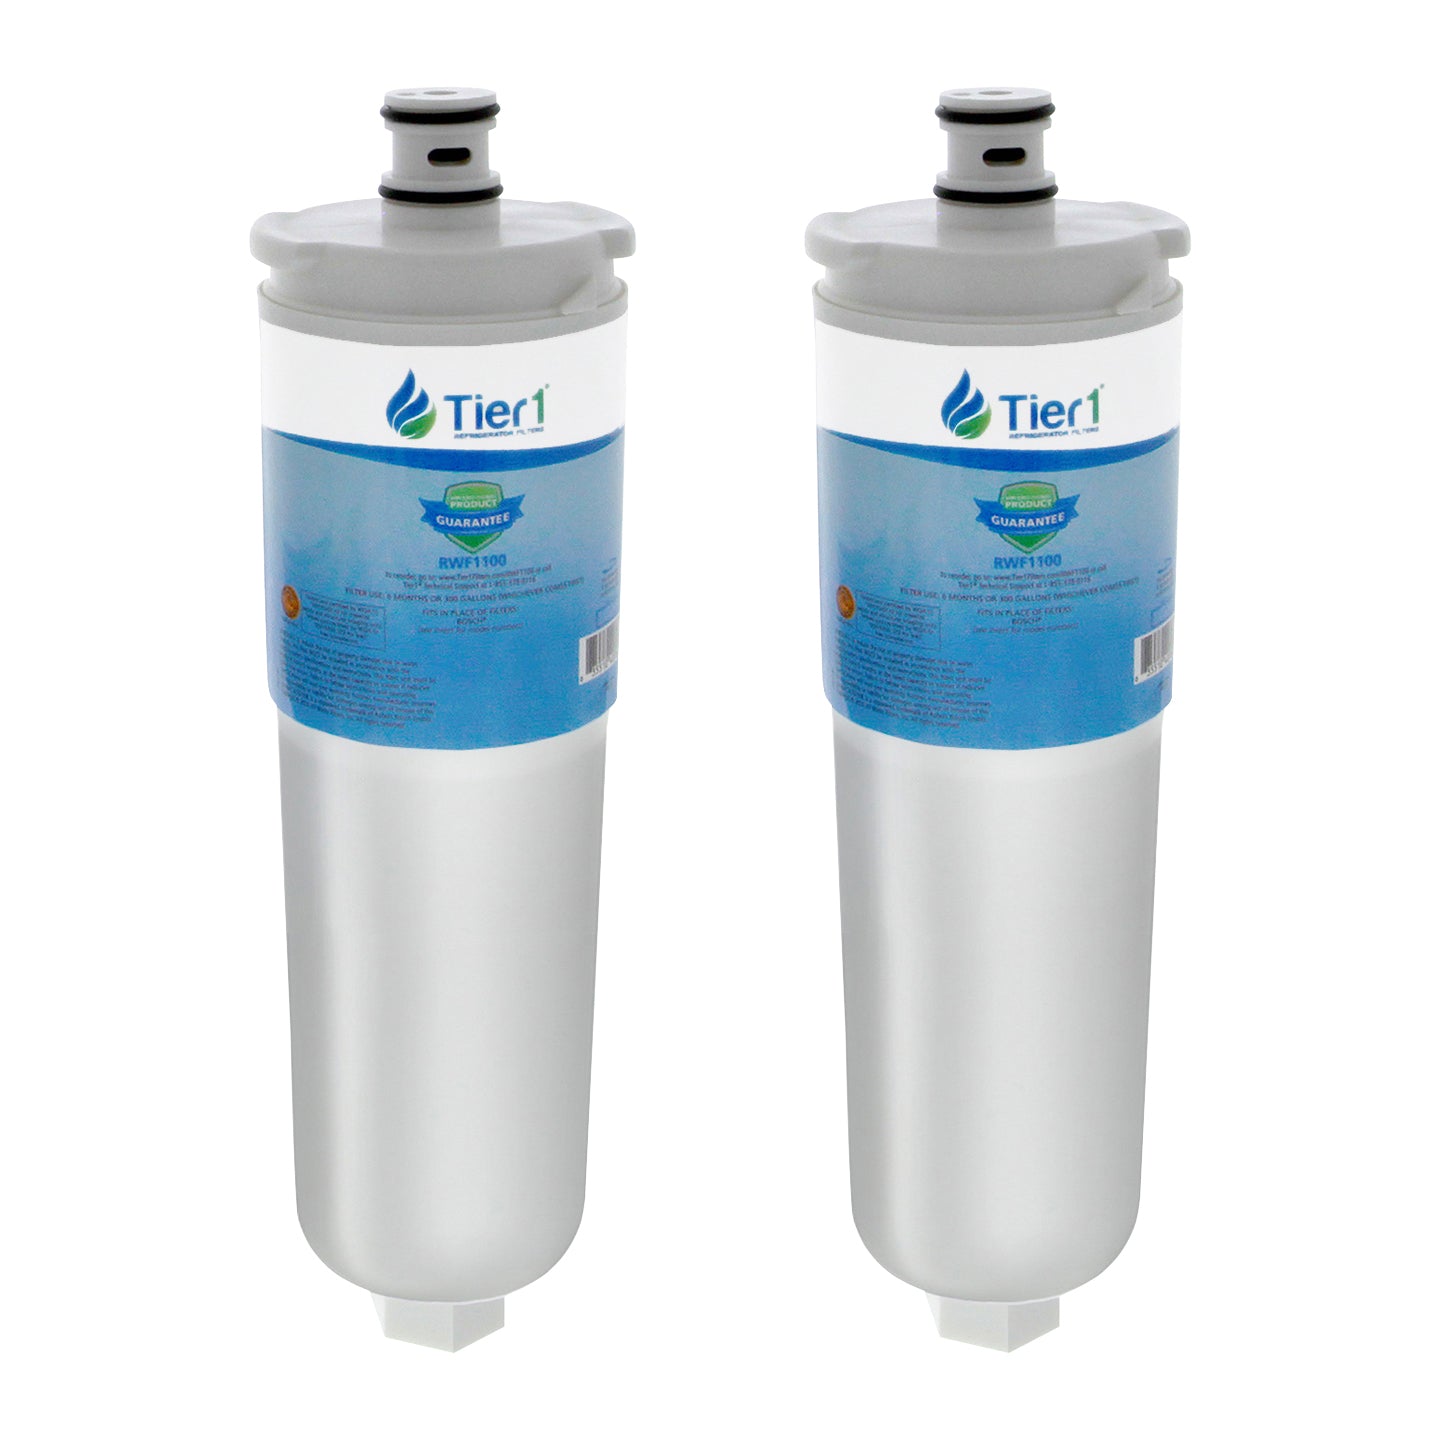 Tier1 Bosch 640565 / CS-52 Refrigerator Water Filter Replacement Comparable